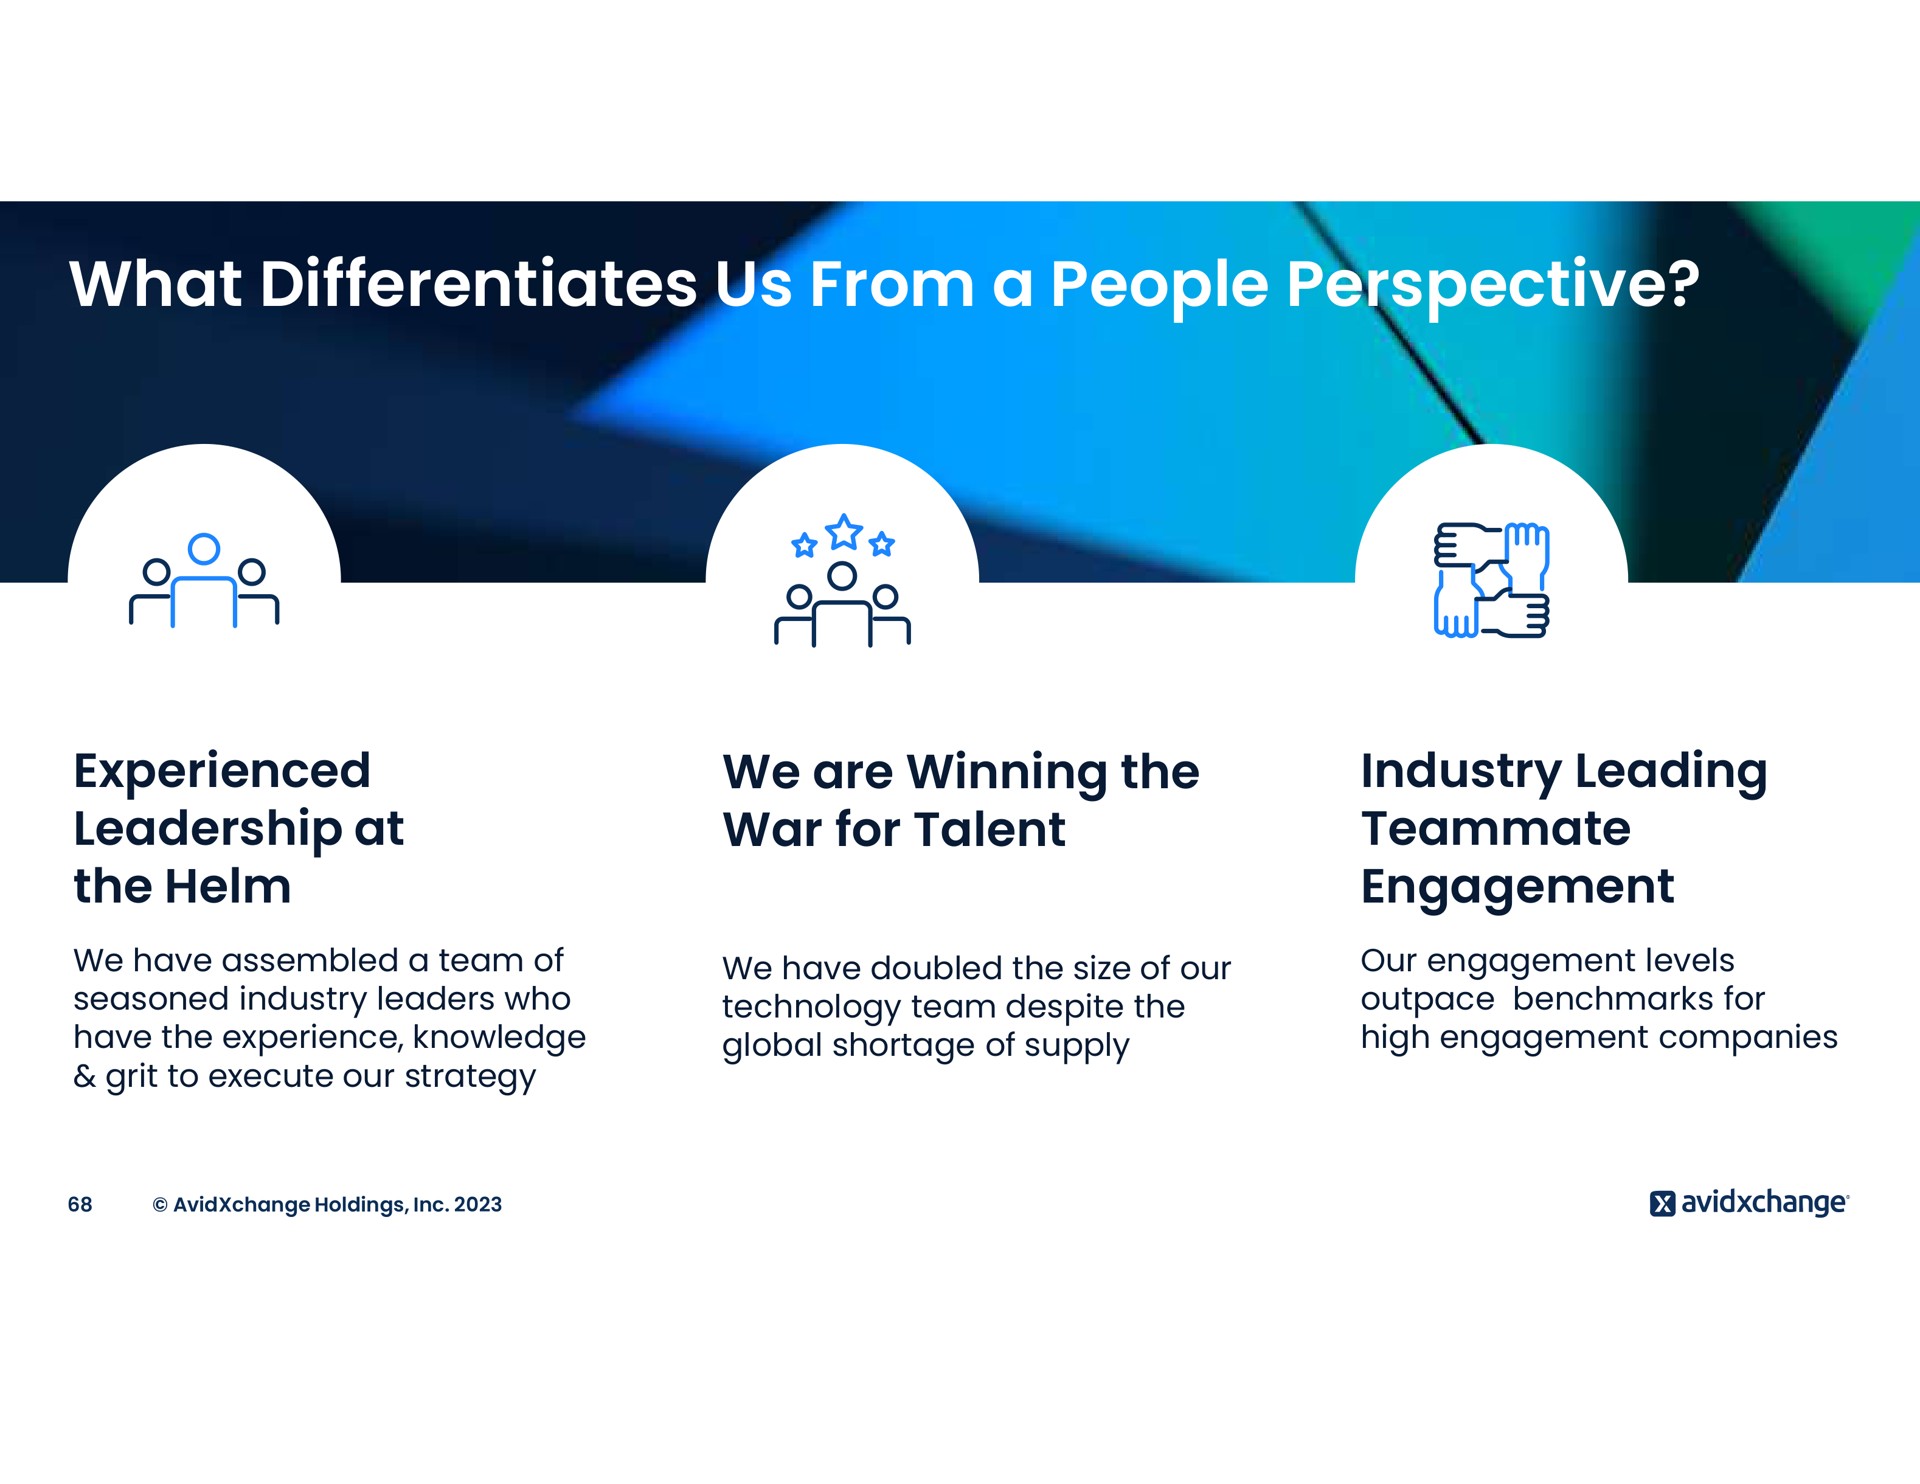 what differentiates us from a people perspective experienced leadership at the helm we are winning the war for talent industry leading teammate engagement i | AvidXchange